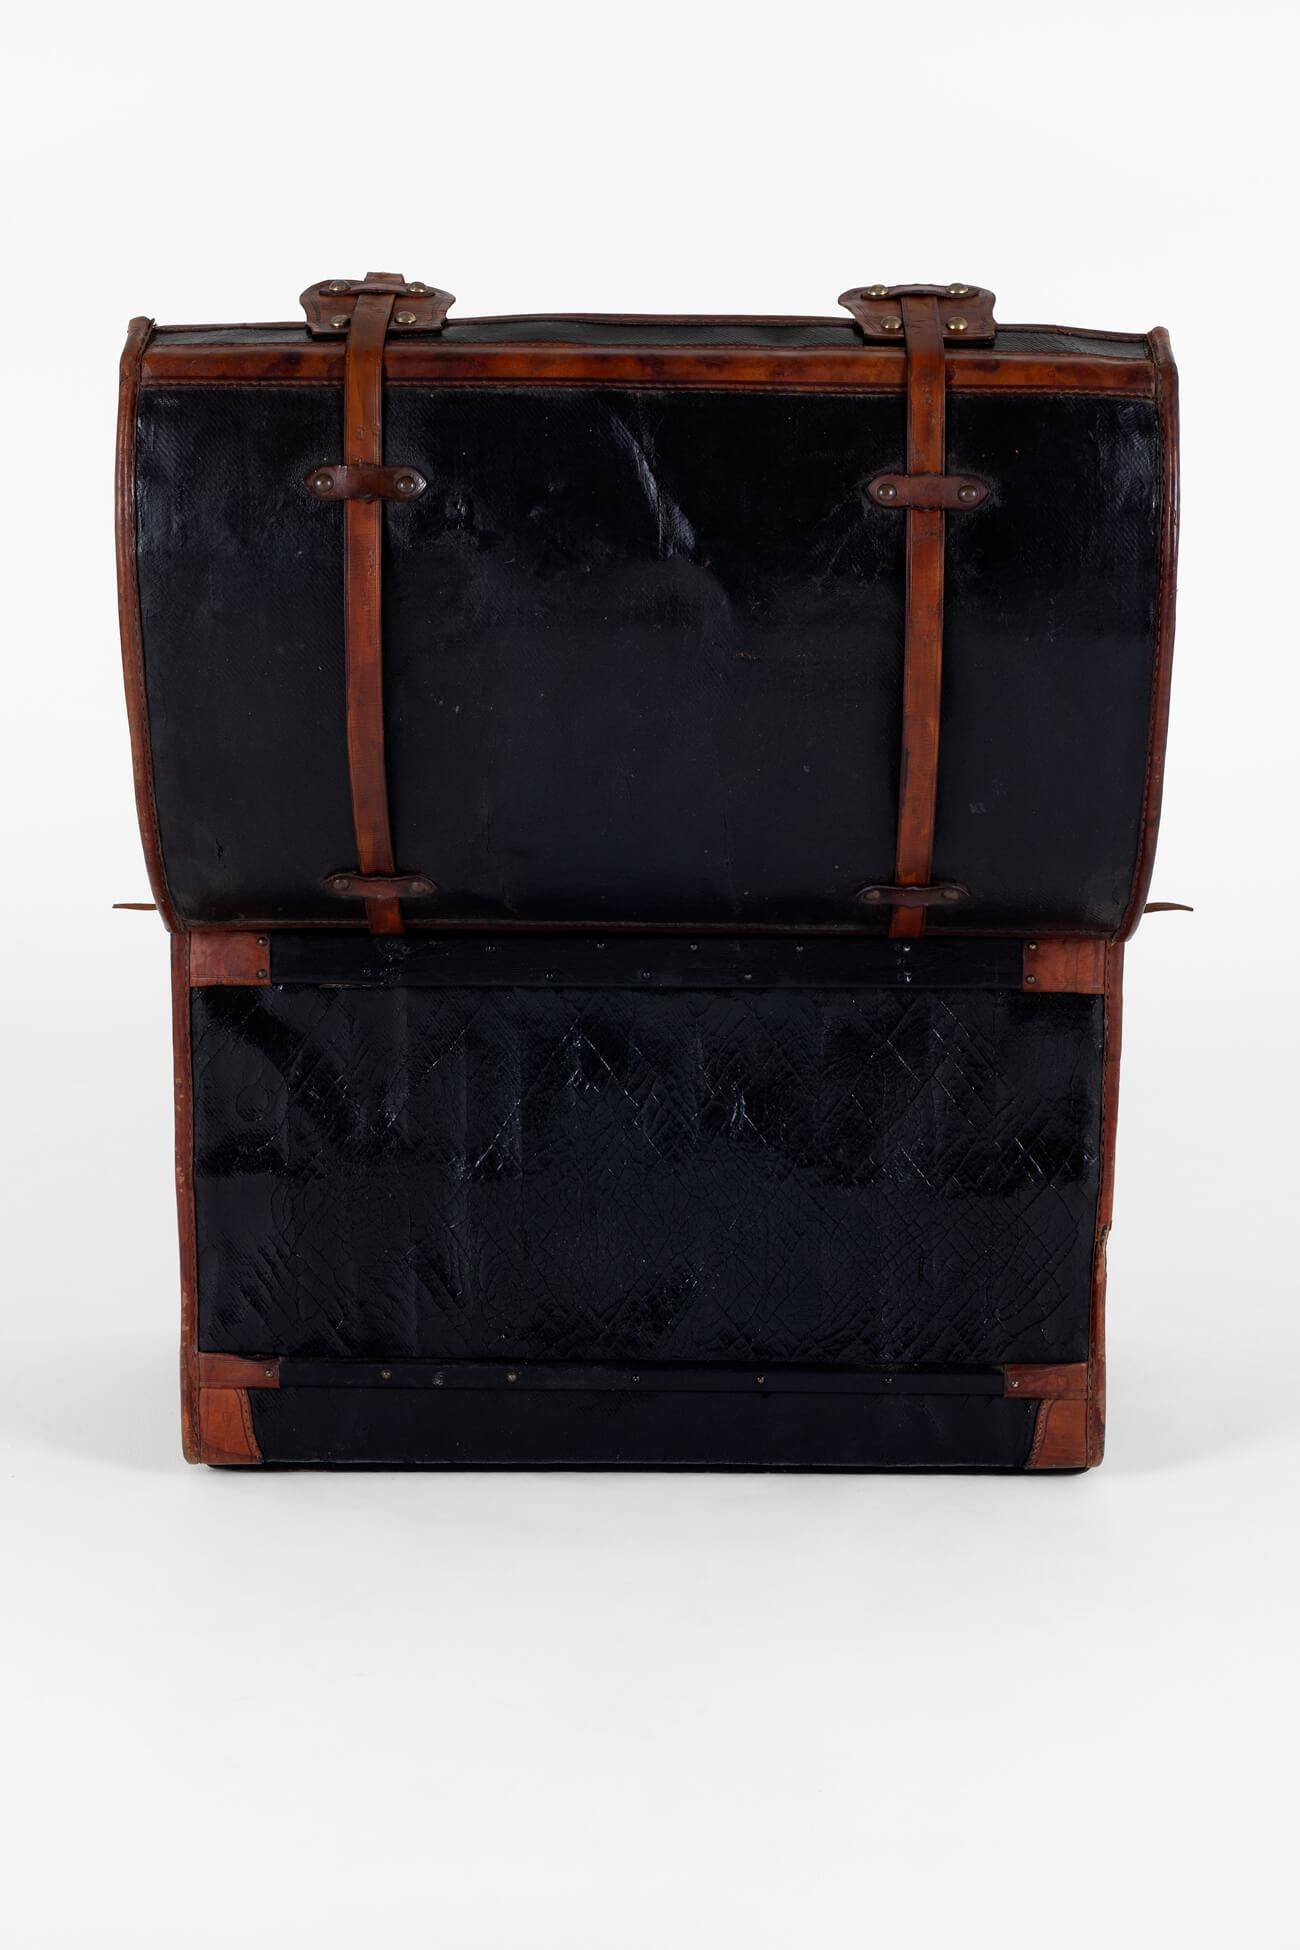 British Large Leather Steamer Trunk For Sale